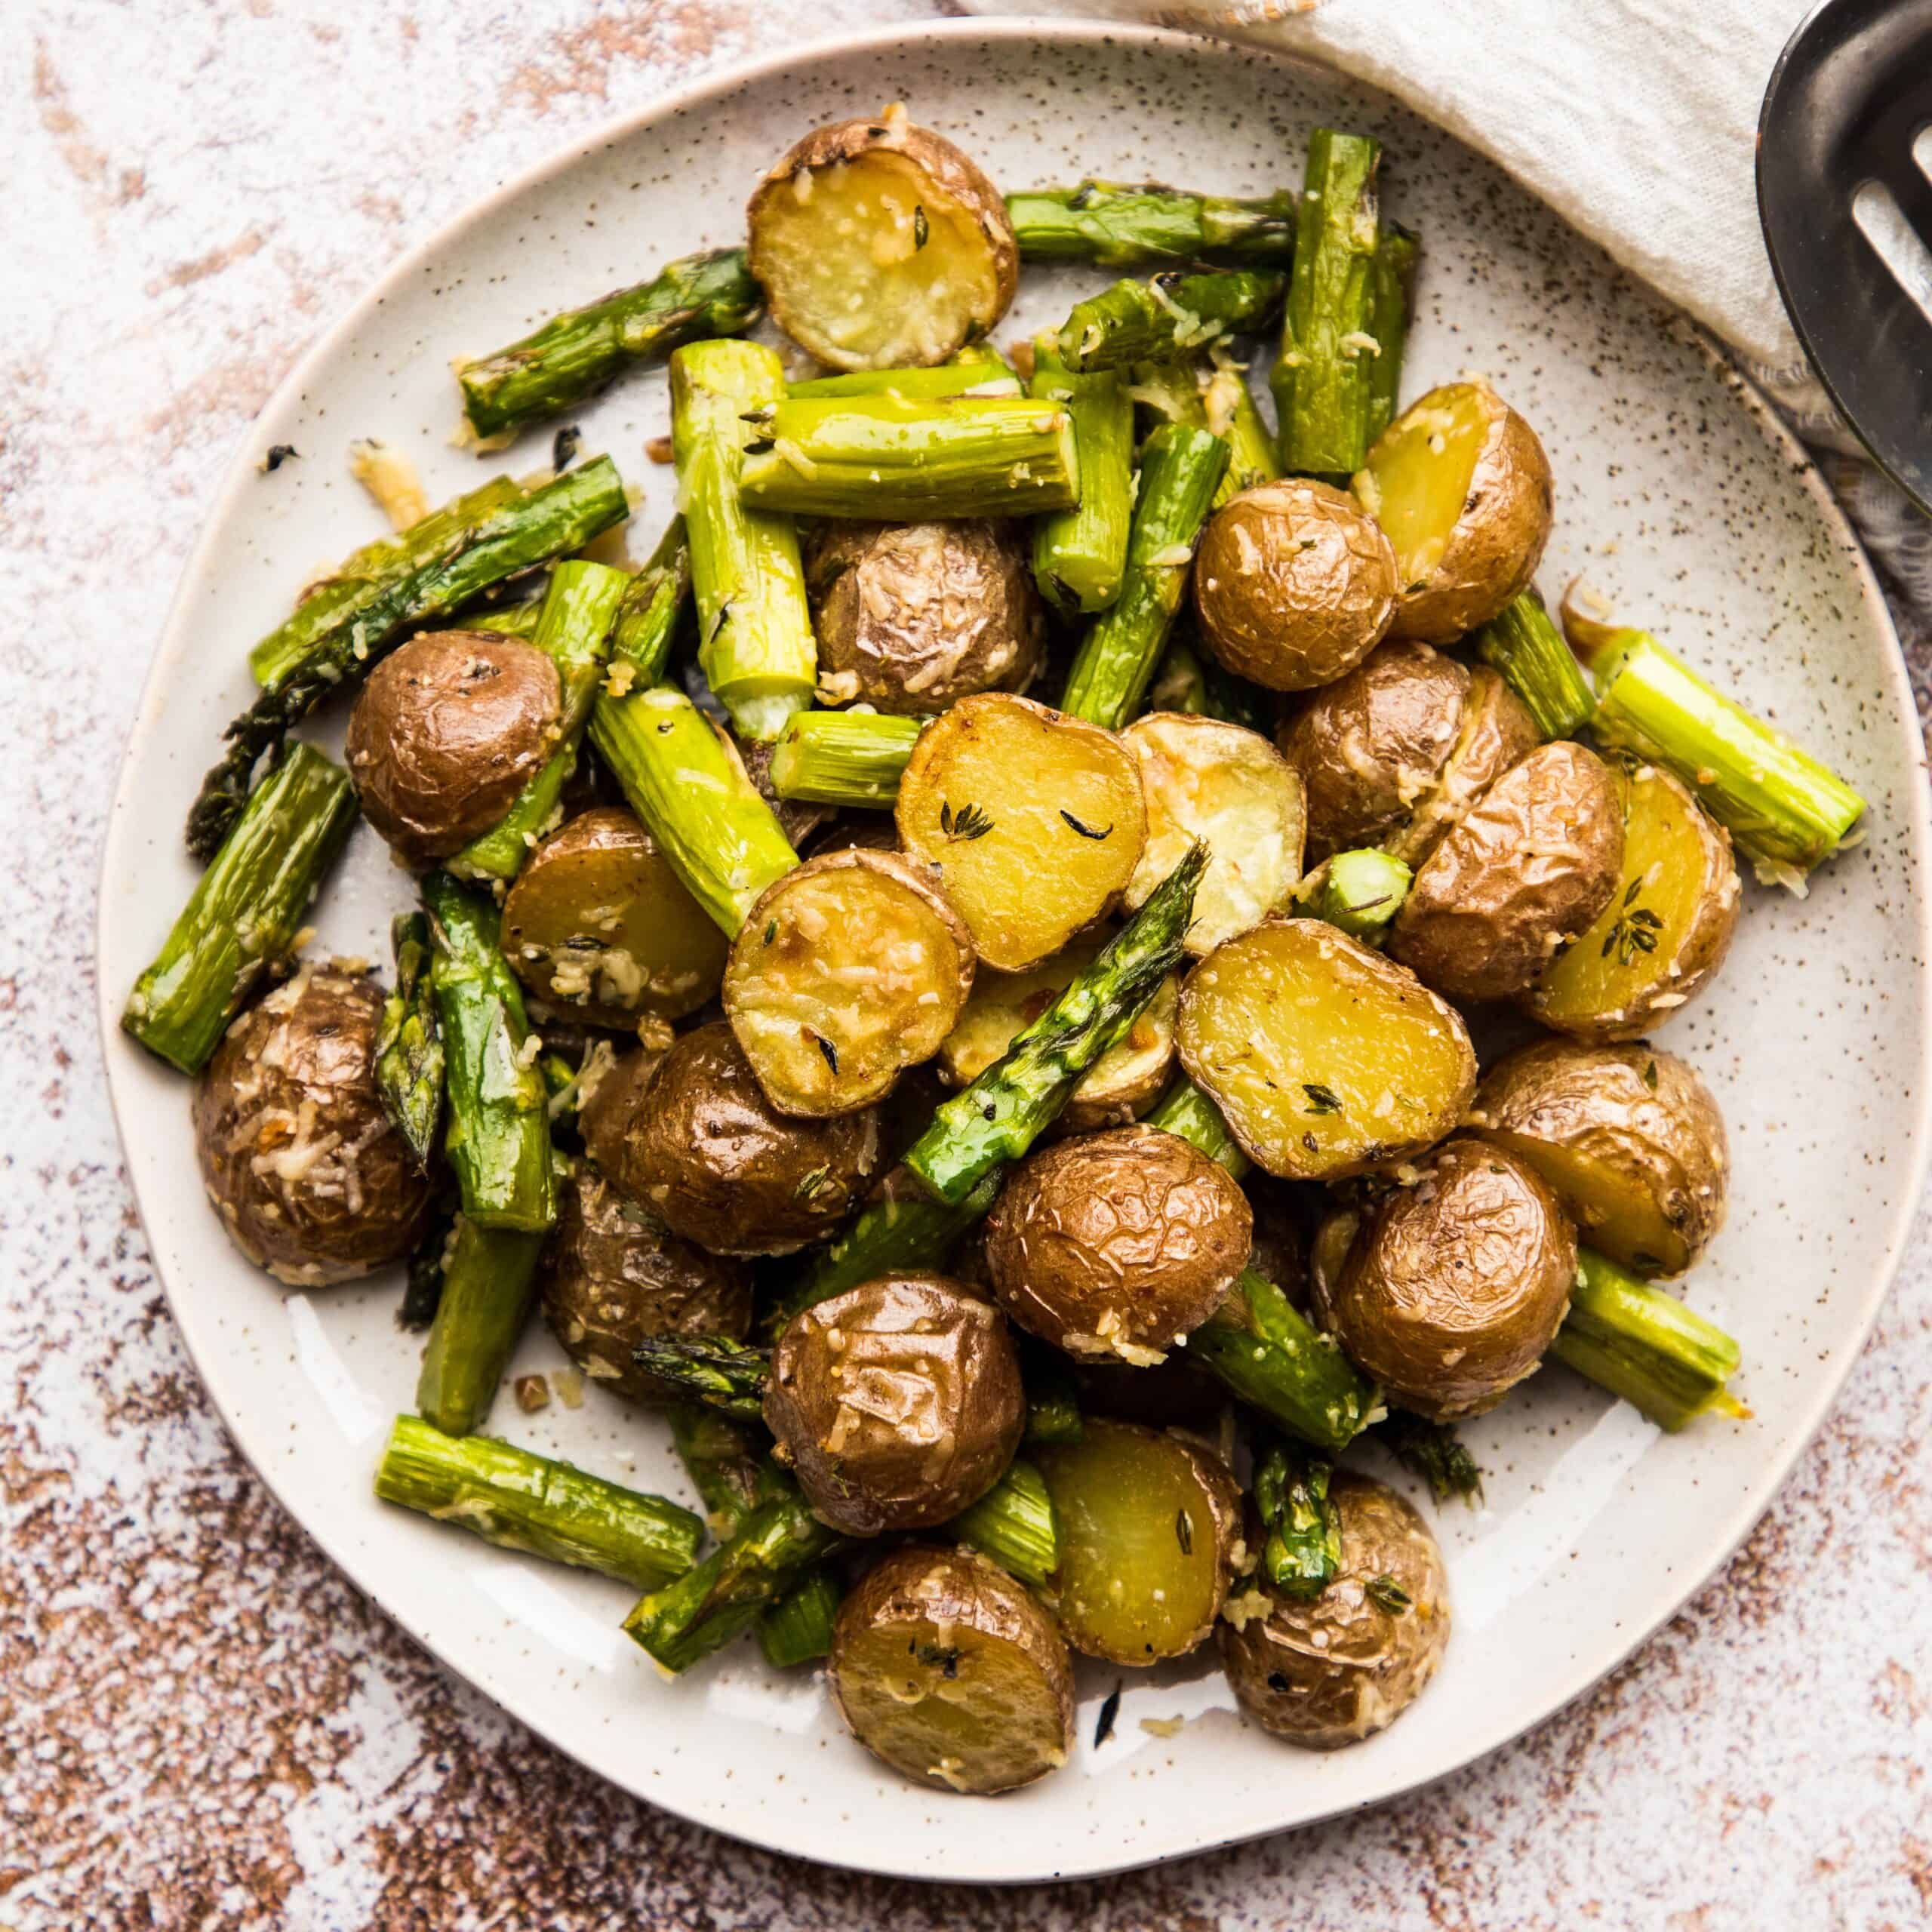 Overhead view of roasted potatoes and asparagus on a plate.